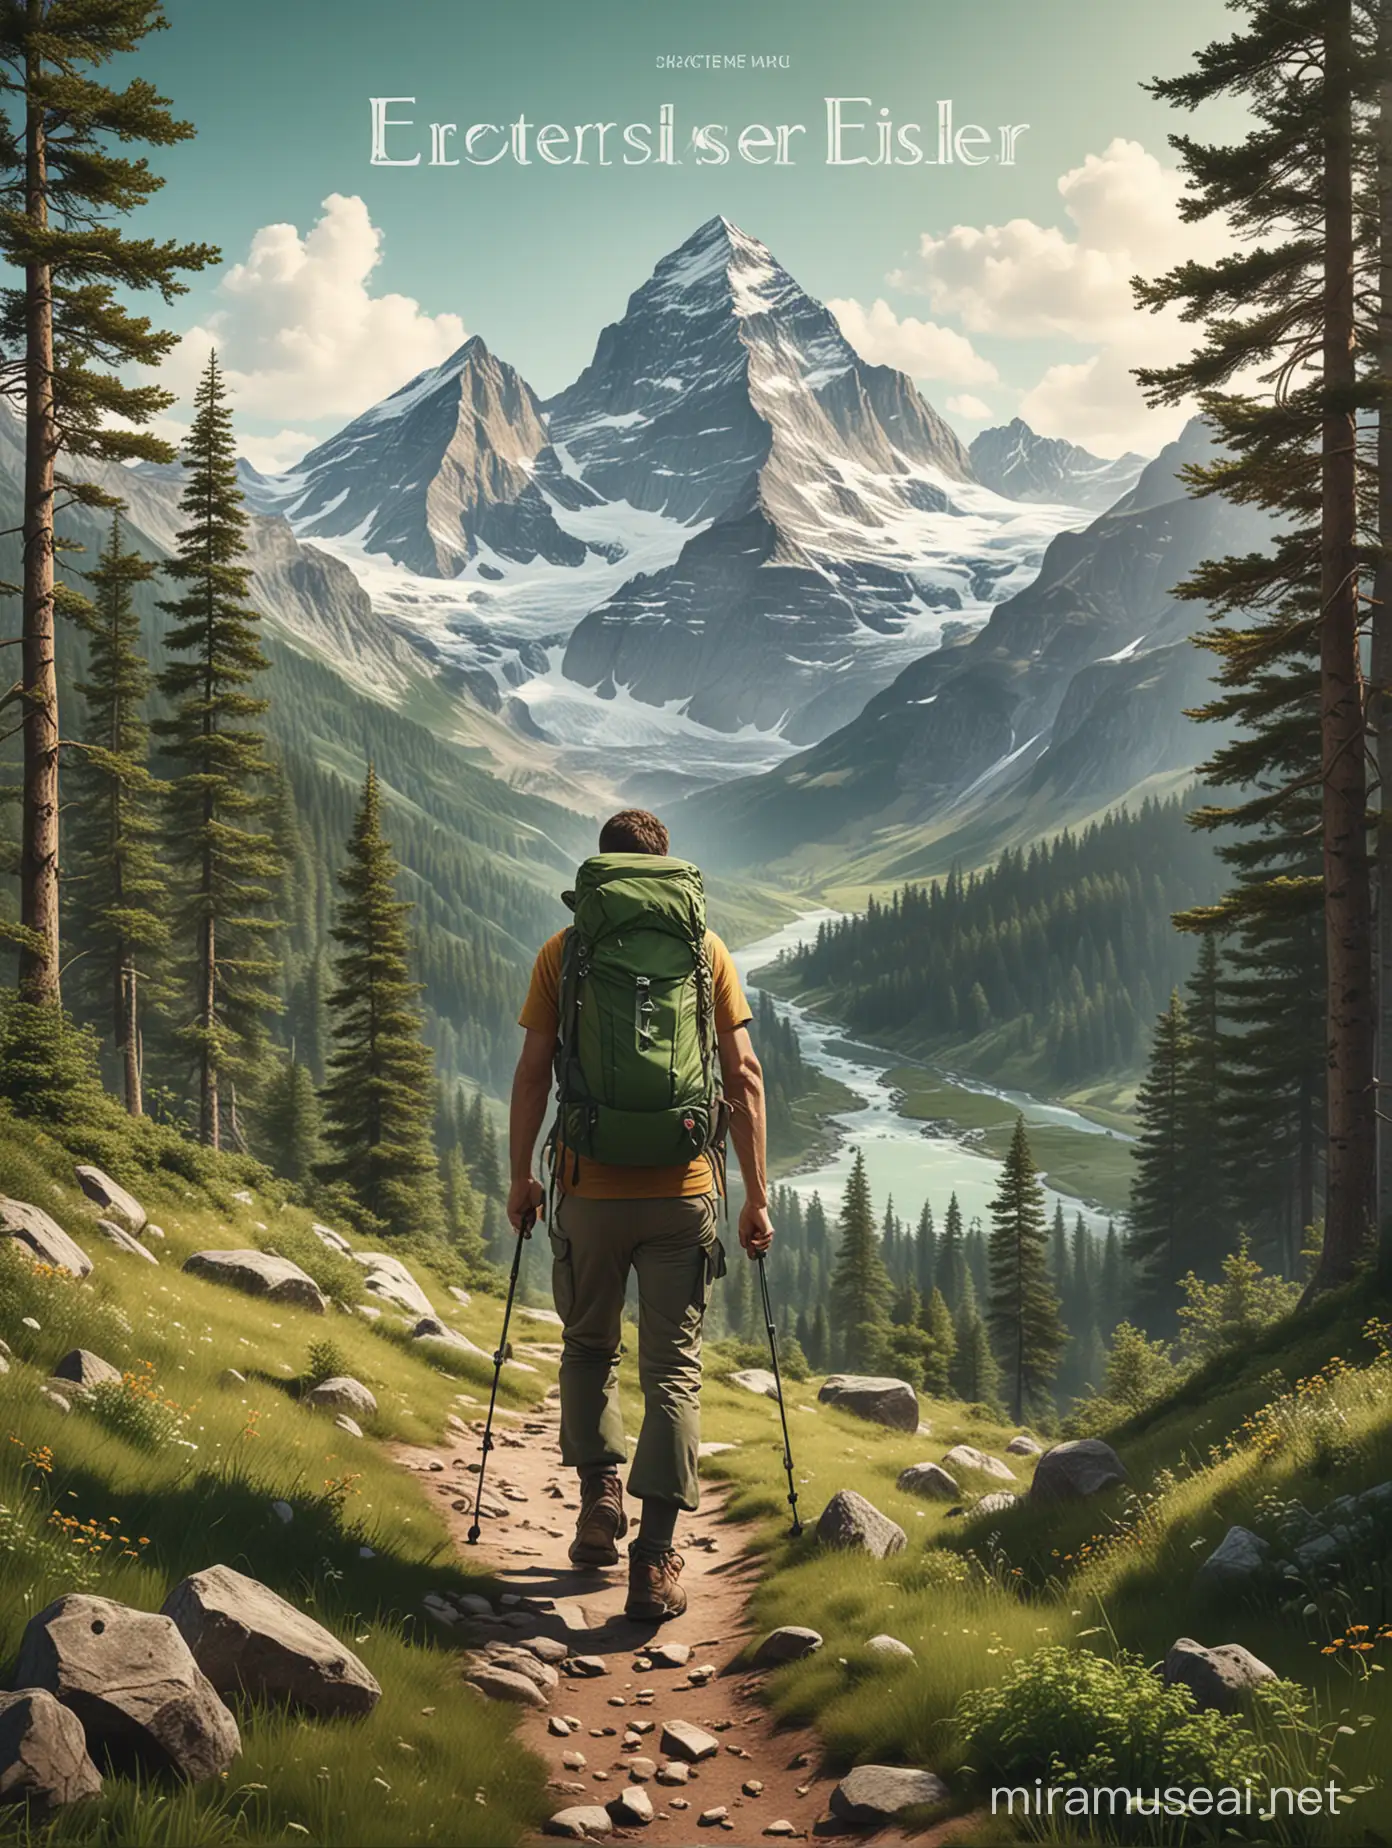 Create an A3 poster with a mountain hiking theme. Include a full-page illustration of a beautiful mountain landscape with green forests and a hiker wearing a backpack and trekking poles in the foreground. The hiker should be wearing an iconic Eiger backpack. Include the Eiger logo at the top of the poster. Use vibrant, natural colors to evoke a sense of adventure. Optionally, add typography that says 'Explore the Unseen' in a complementary font at the bottom.